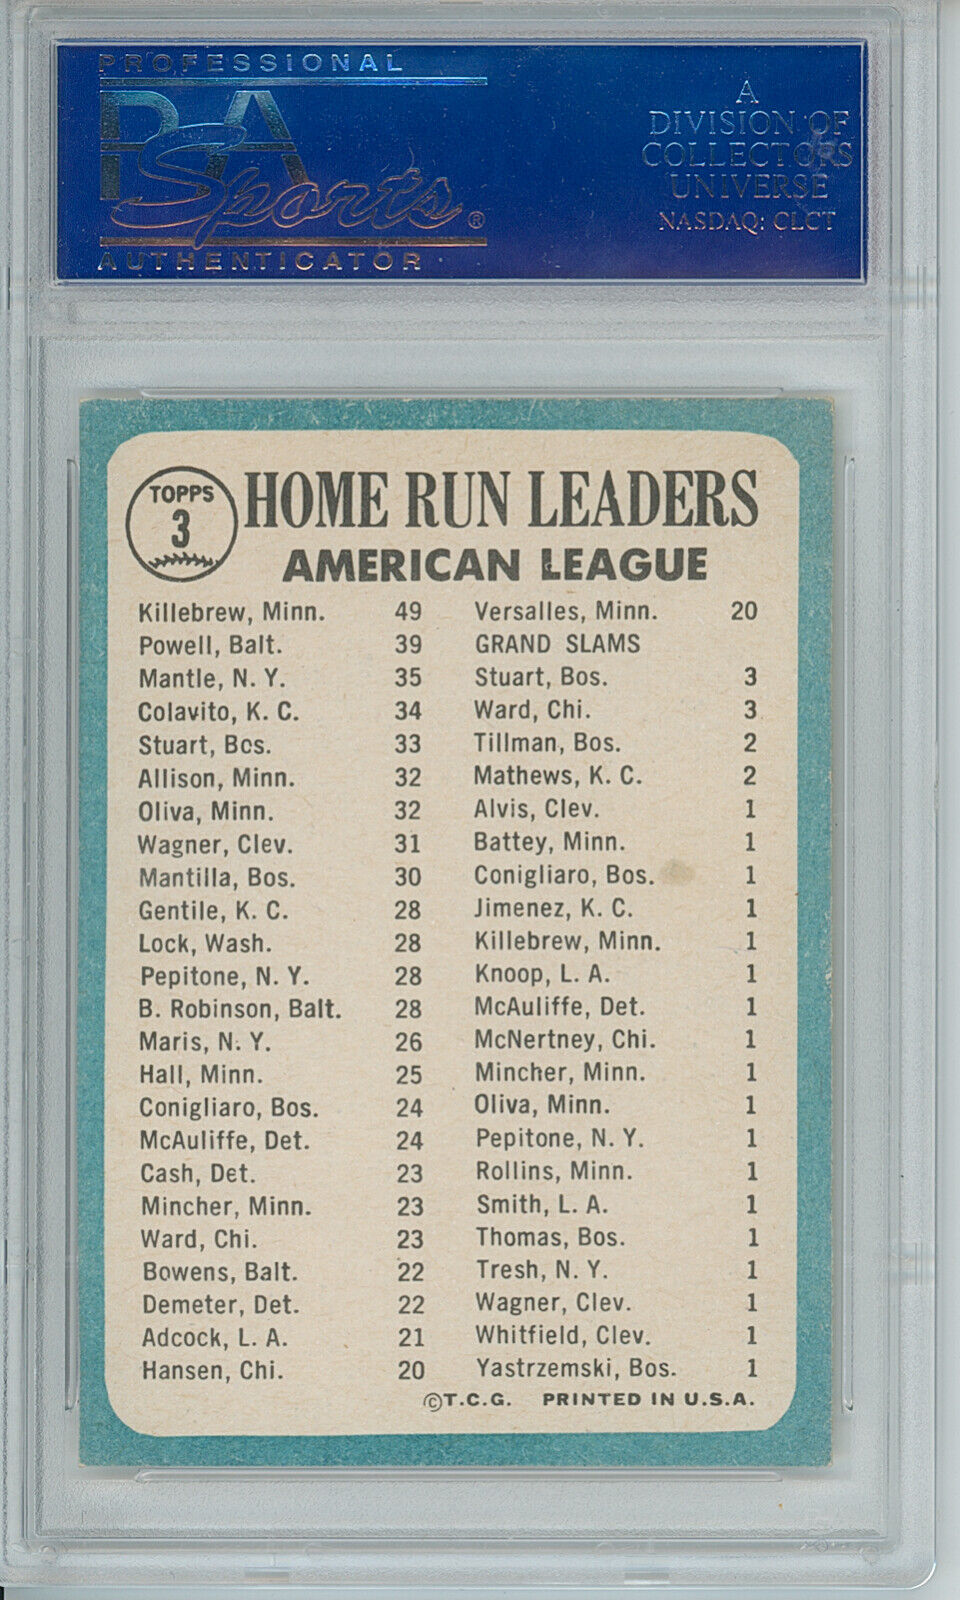 1965 Topps A.L. Home Run Leaders, Mickey Mantle, Killebrew, Powell. PSA 7